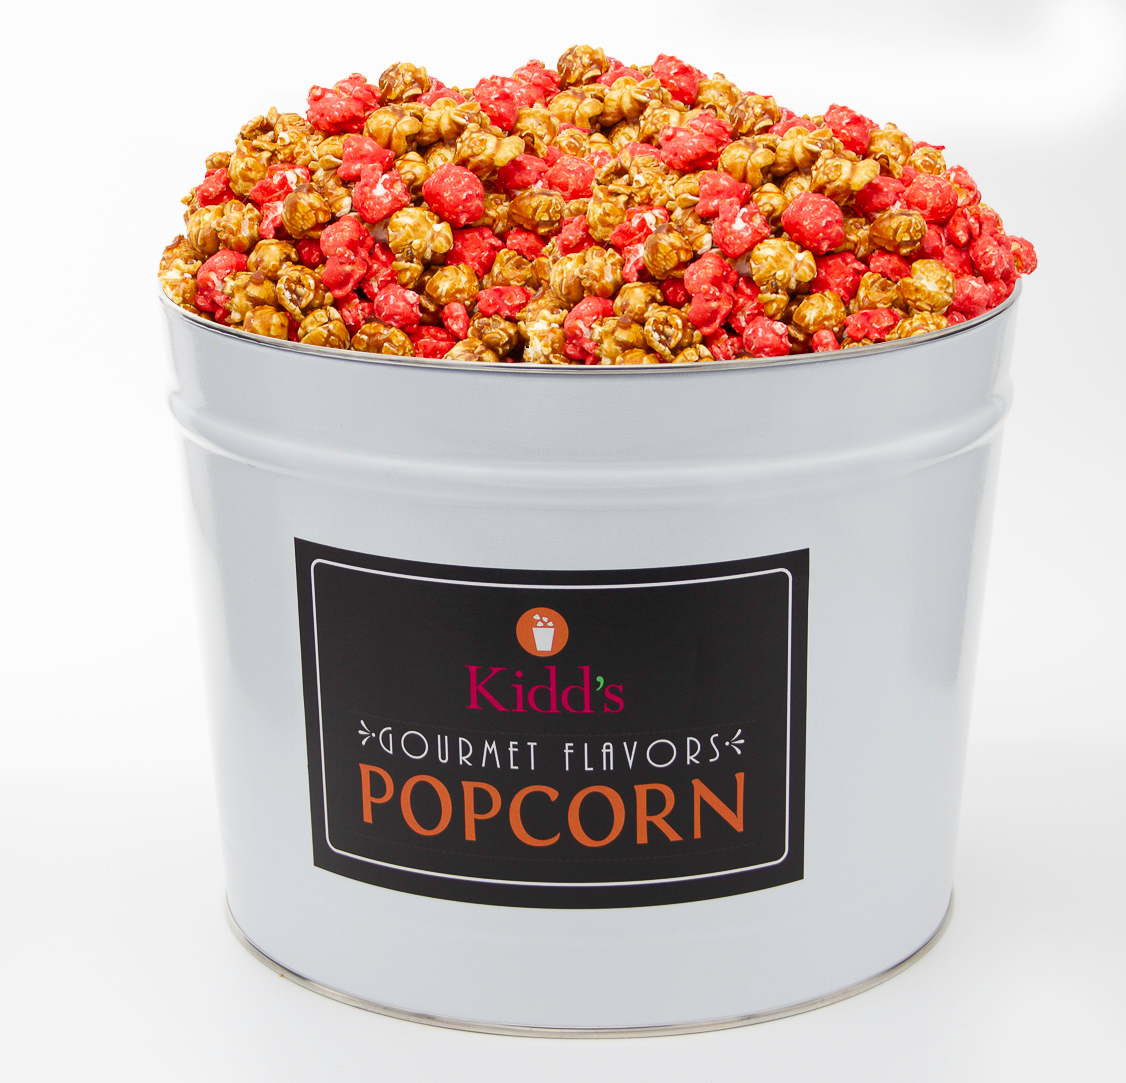 Signature White and Black 2 gallon Popcorn tin filled with RedHots Cinnamon and  tasty caramel popcorn